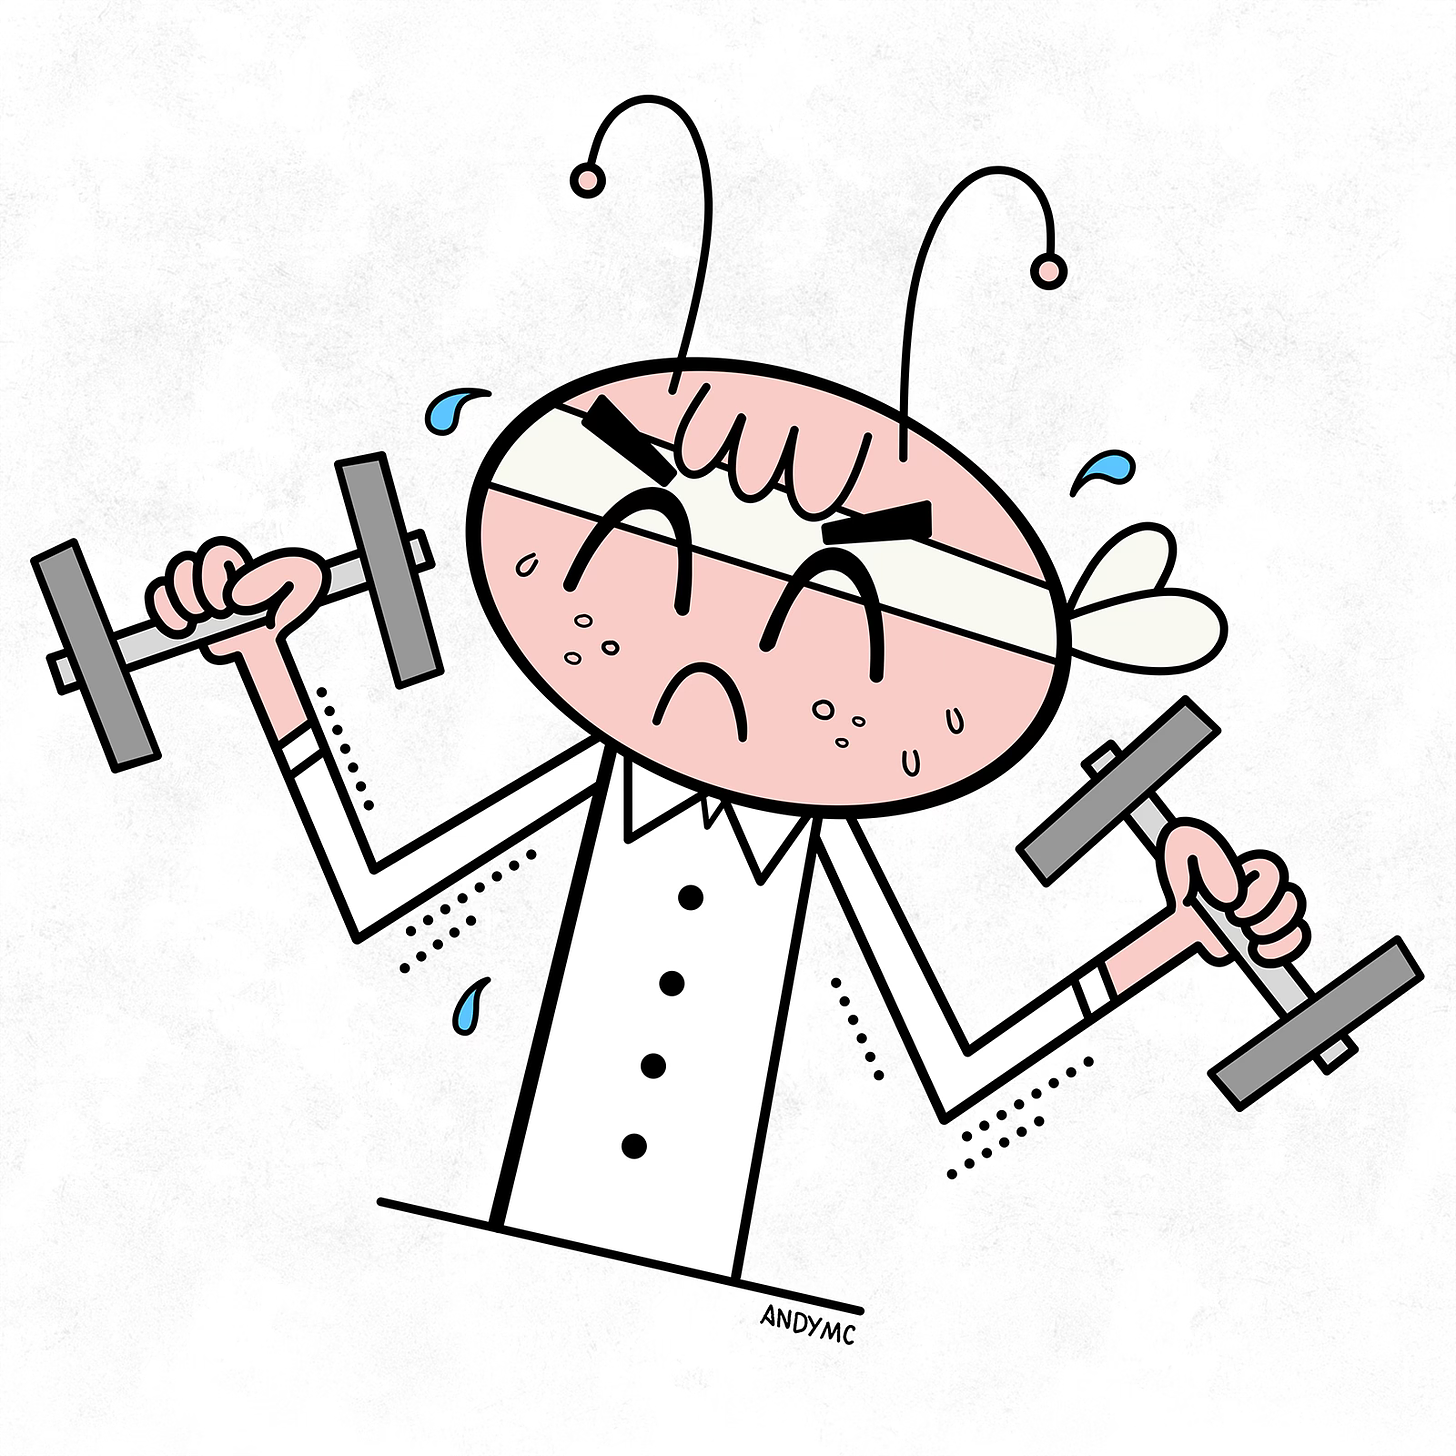 An illustration of an Ant lifting weights.